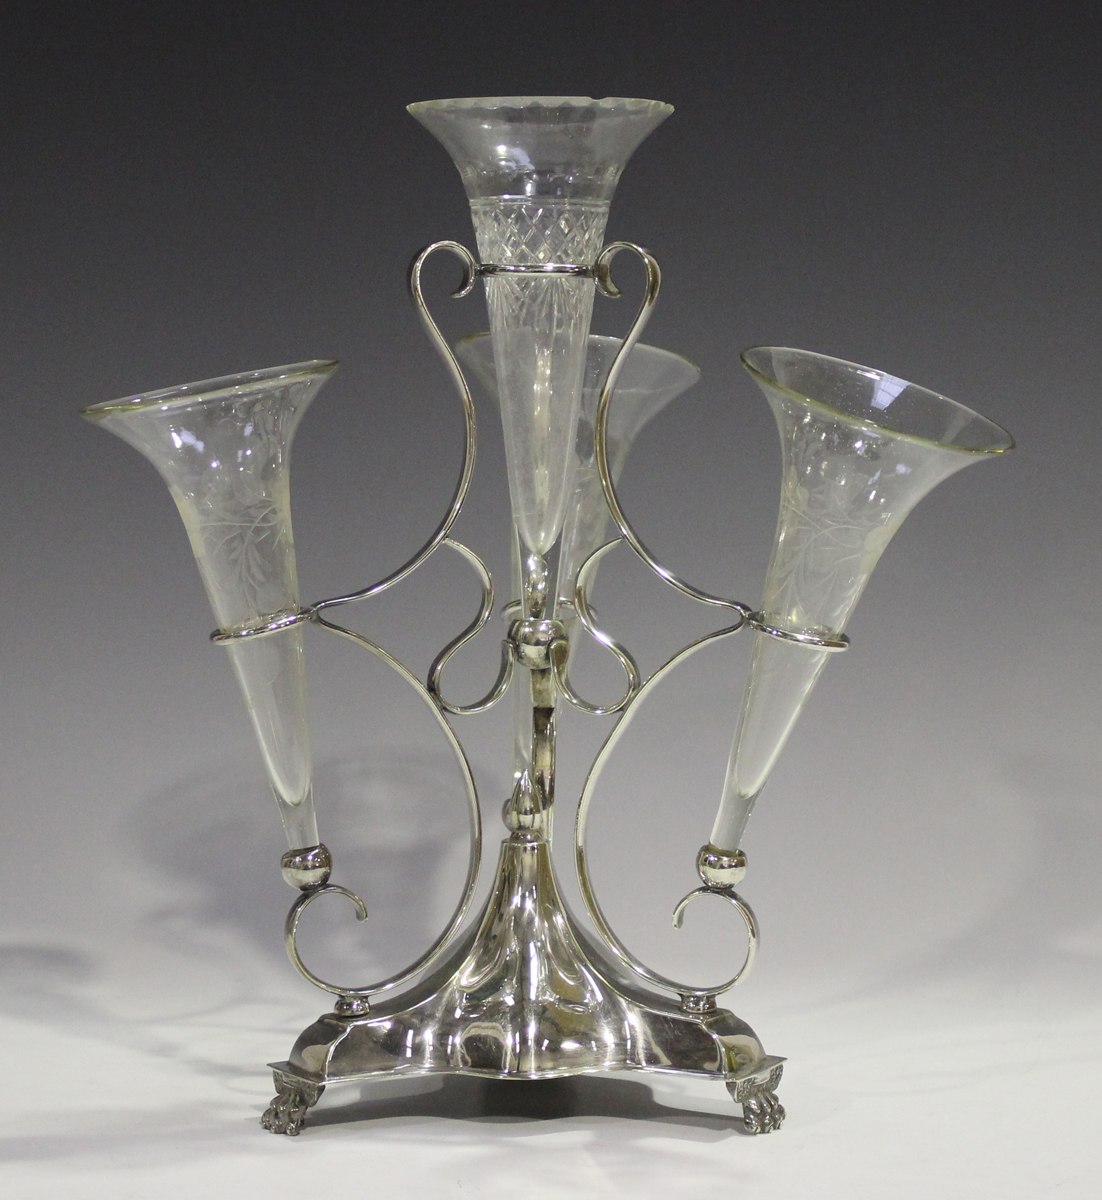 An early 20th century plated epergne, fitted with four glass trumpets, height 33.5cm (one trumpet - Image 5 of 7